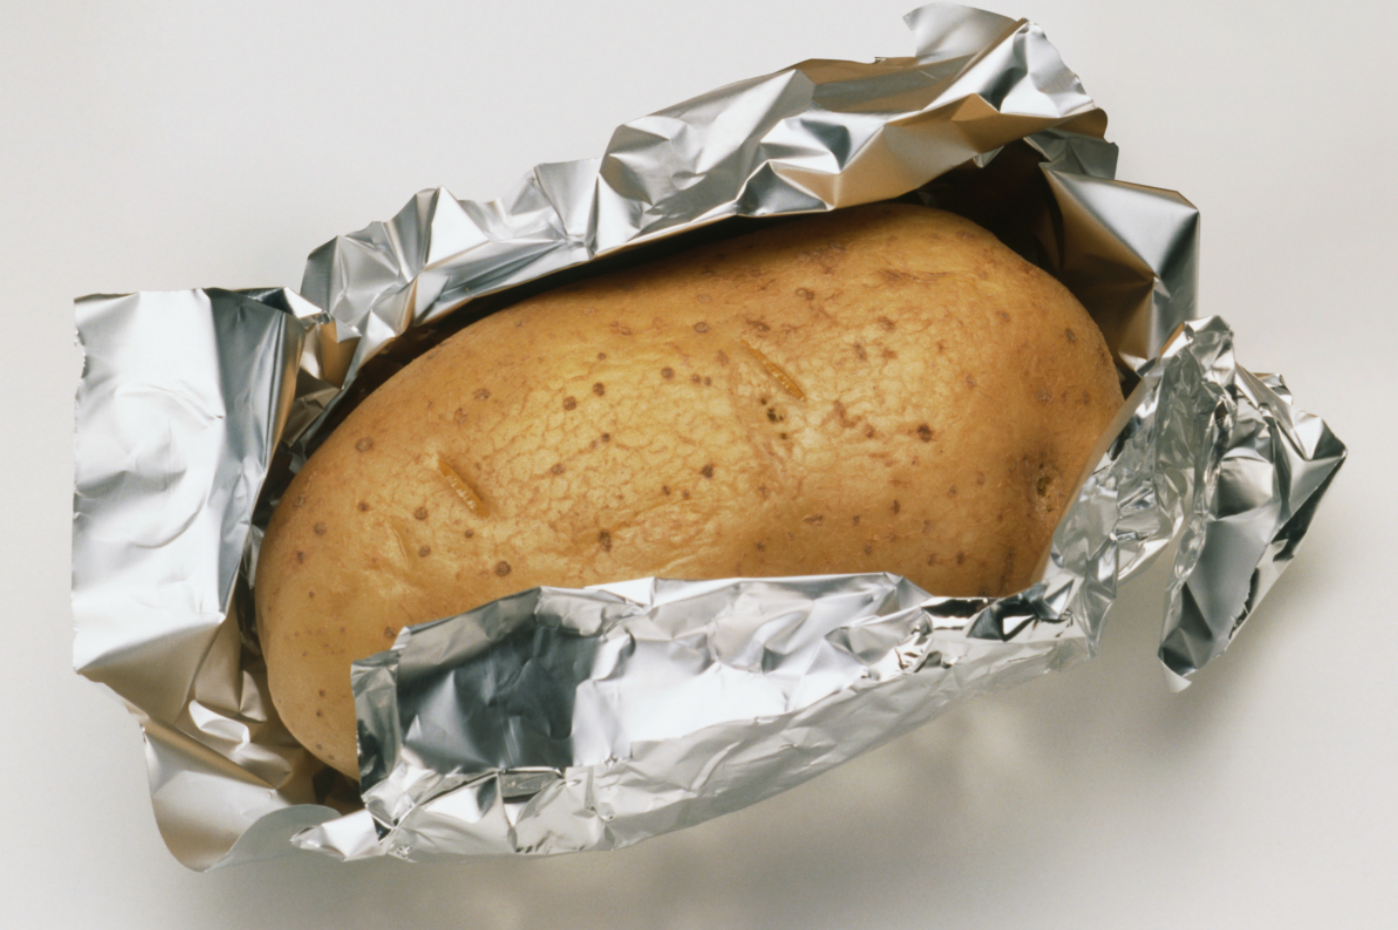 Can You Reheat A Baked Potato The Next Day How To Reheat A Baked Potato That S Sure To Please Everyone